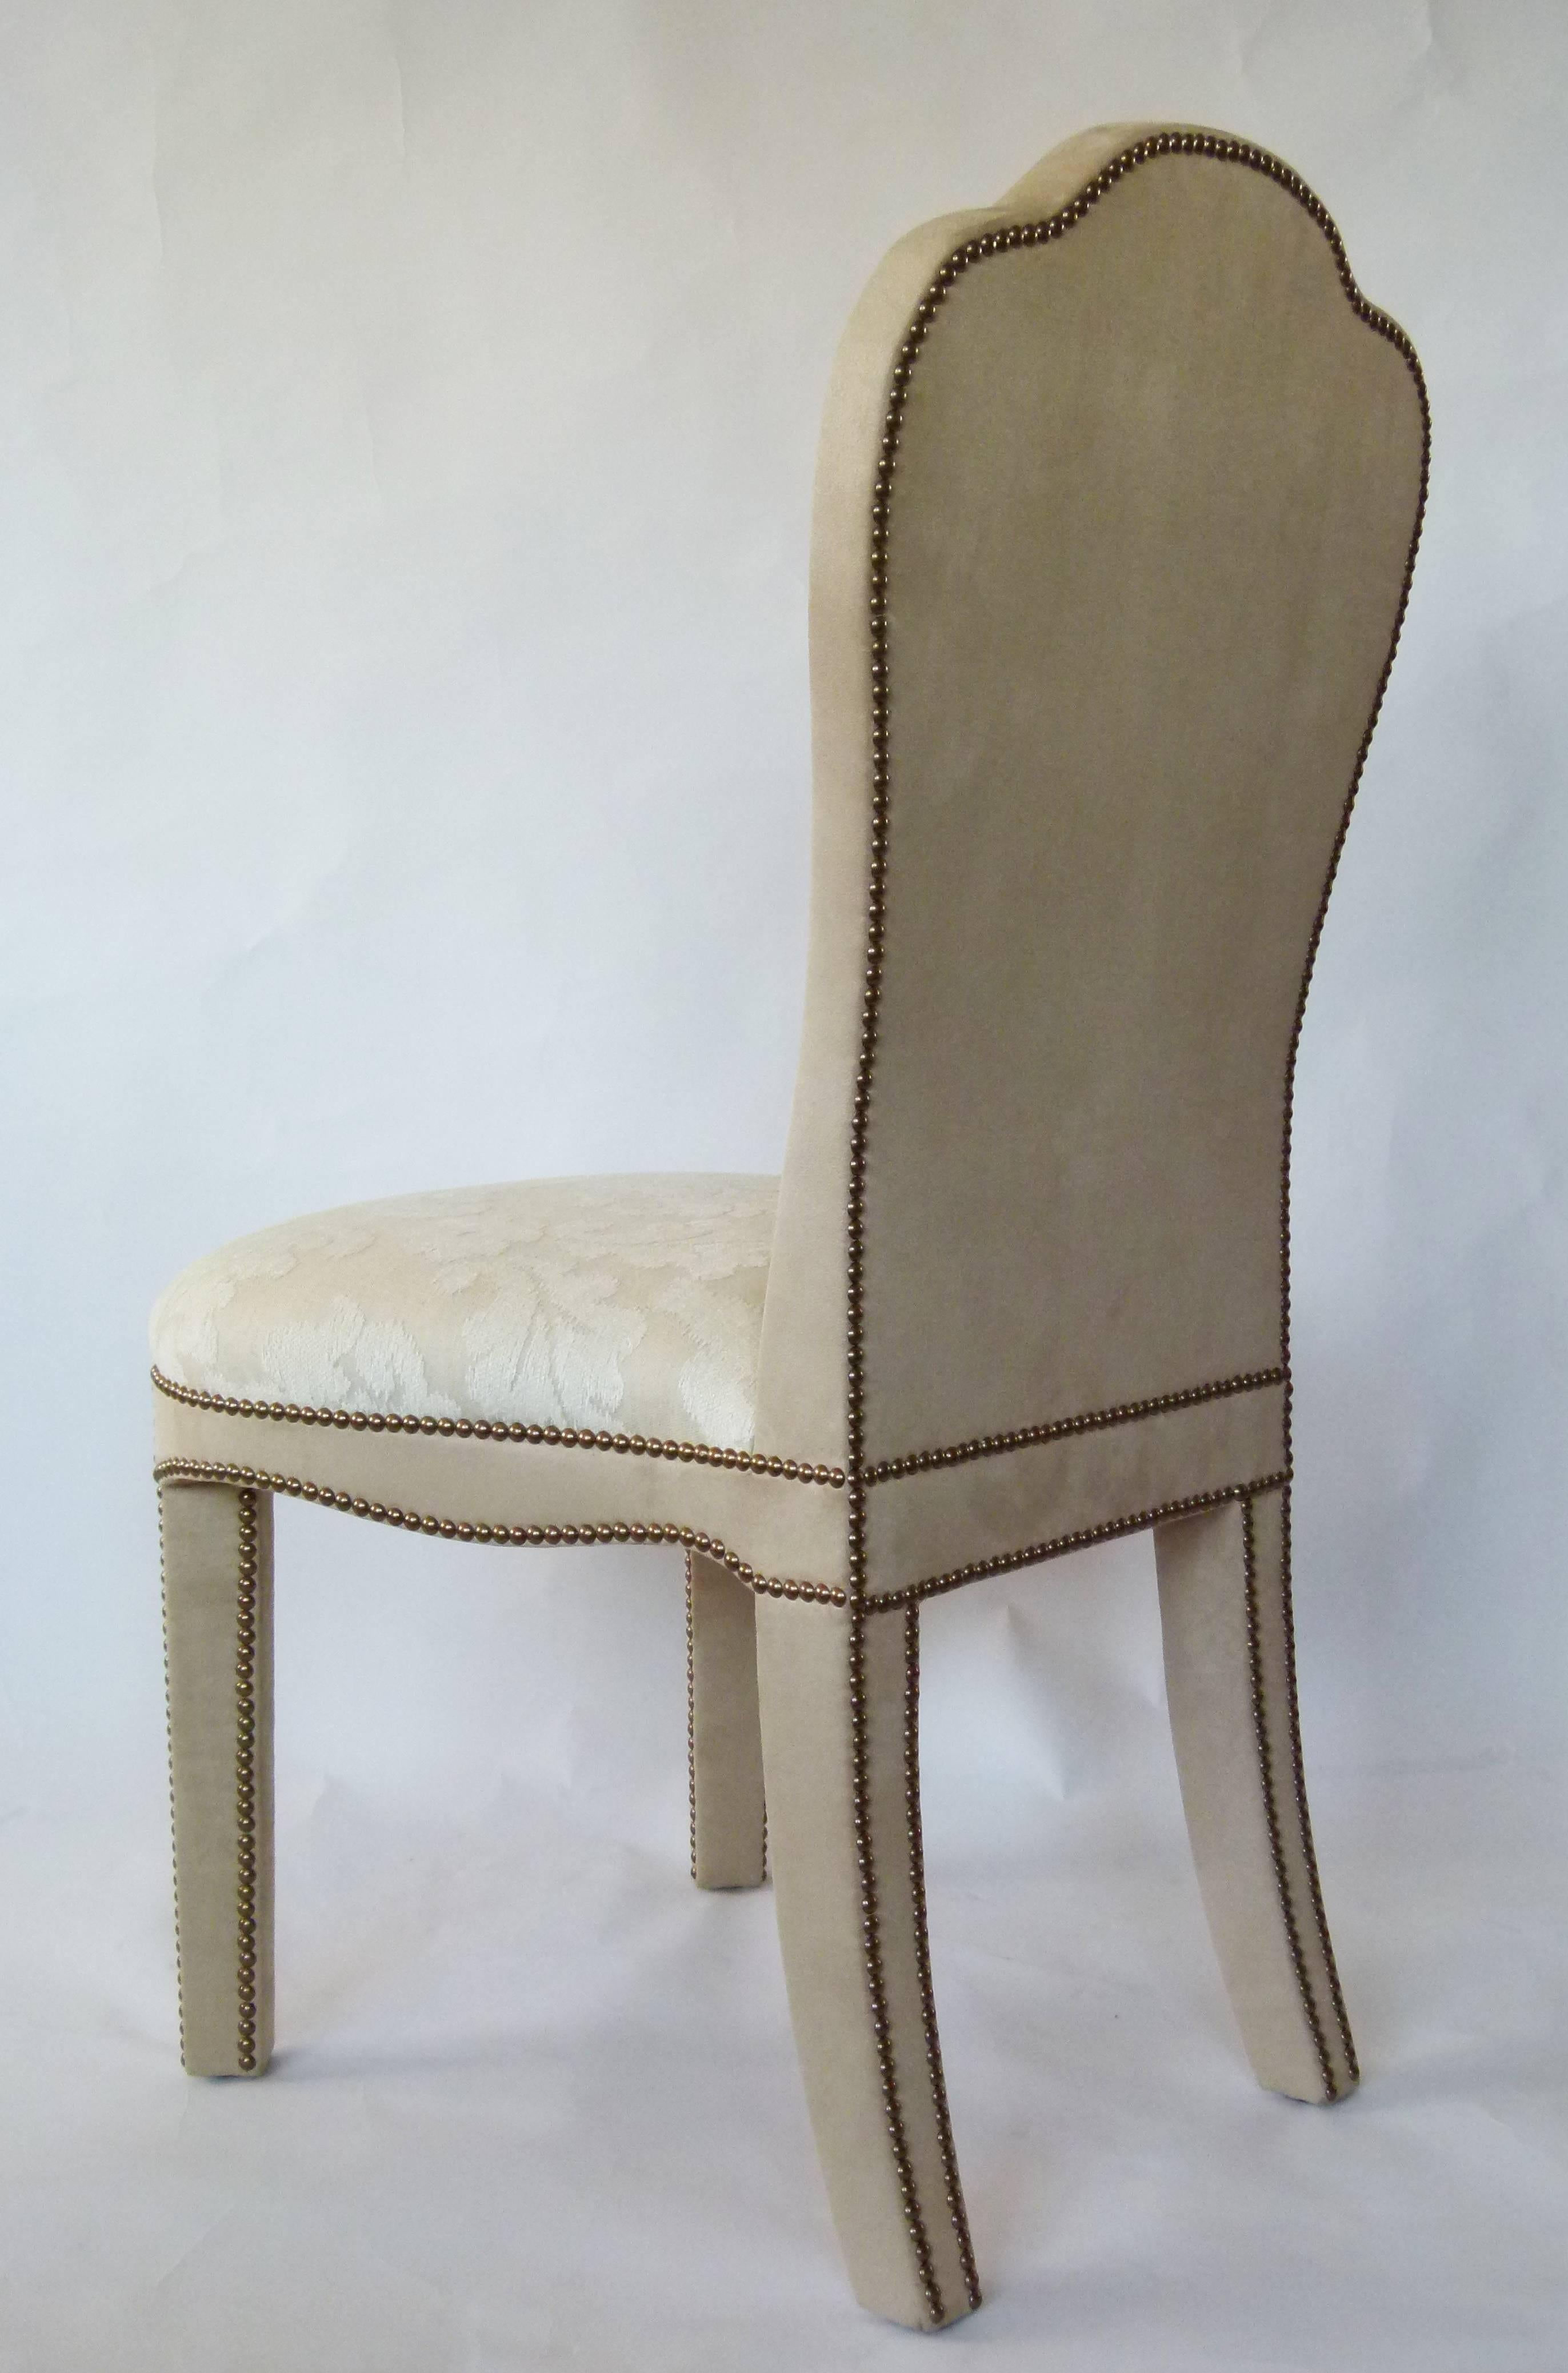 The Titus dining chair shown here in off-white Damask, contrasting faux suede and hand studded velvet is part of the velvet furniture collection designed by Alidad Ltd and Thomas Messel and based on Baroque and neoclassical shapes. The chair can be